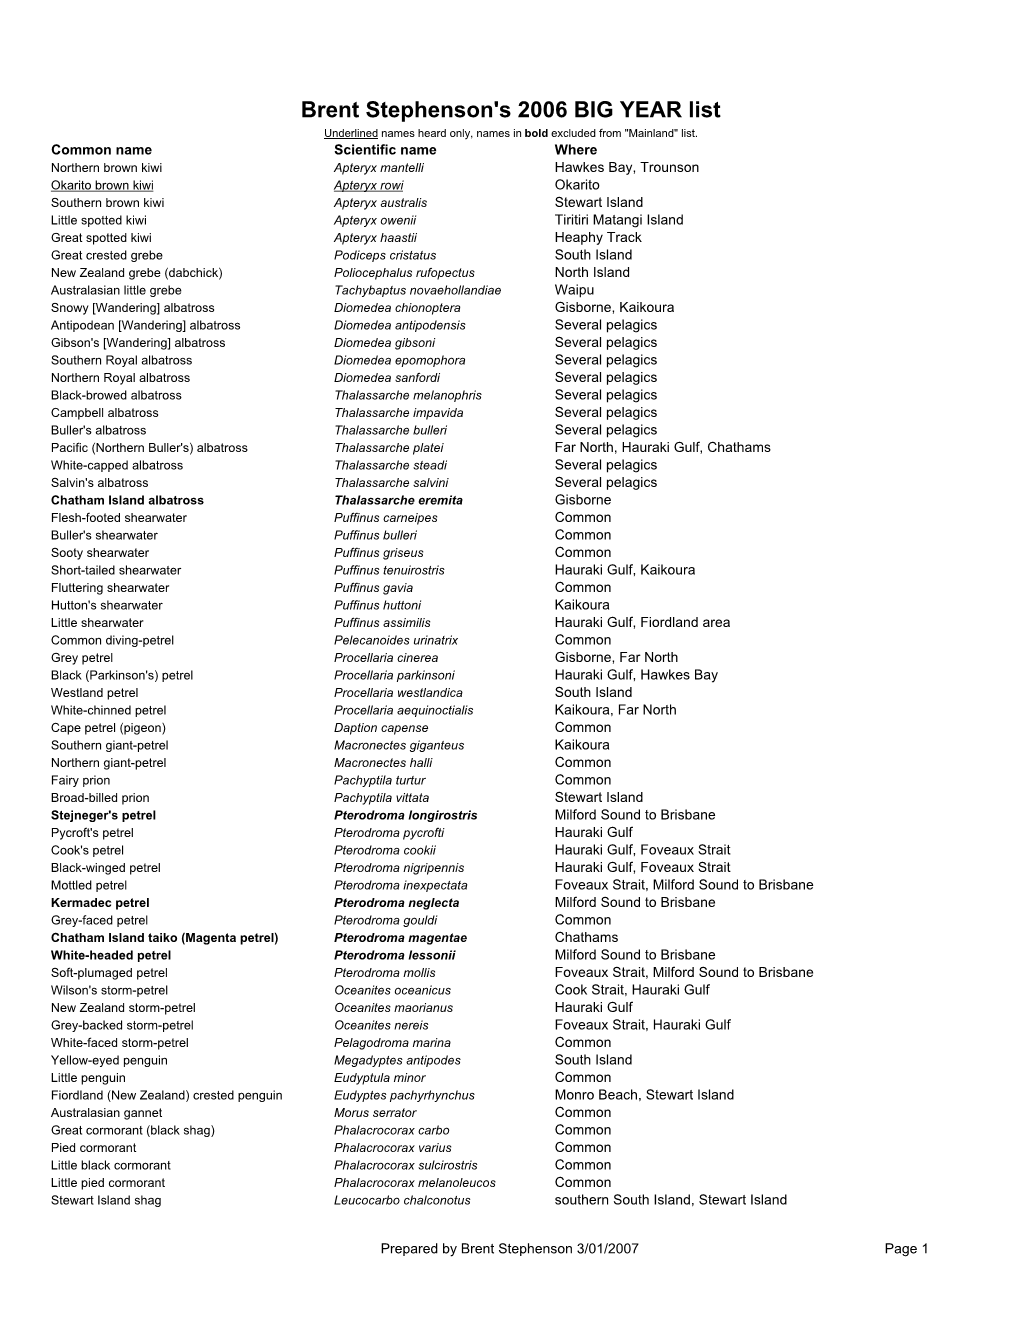 Brent Stephenson's 2006 BIG YEAR List Underlined Names Heard Only, Names in Bold Excluded from "Mainland" List